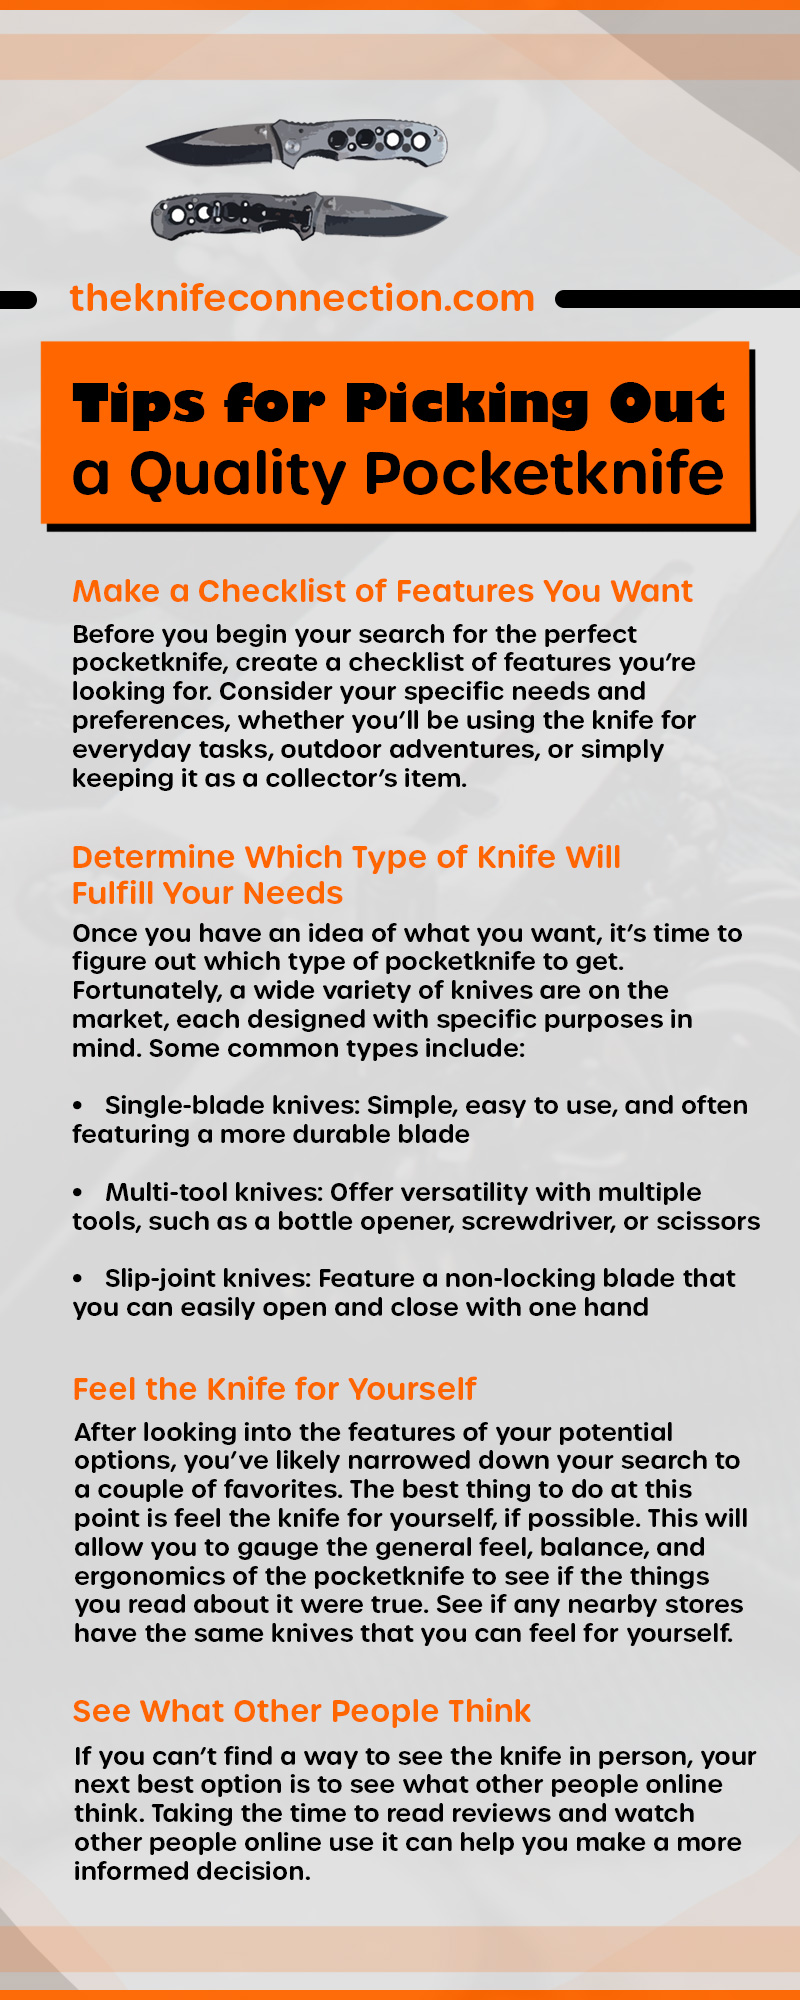 Tips for Picking Out a Quality Pocketknife